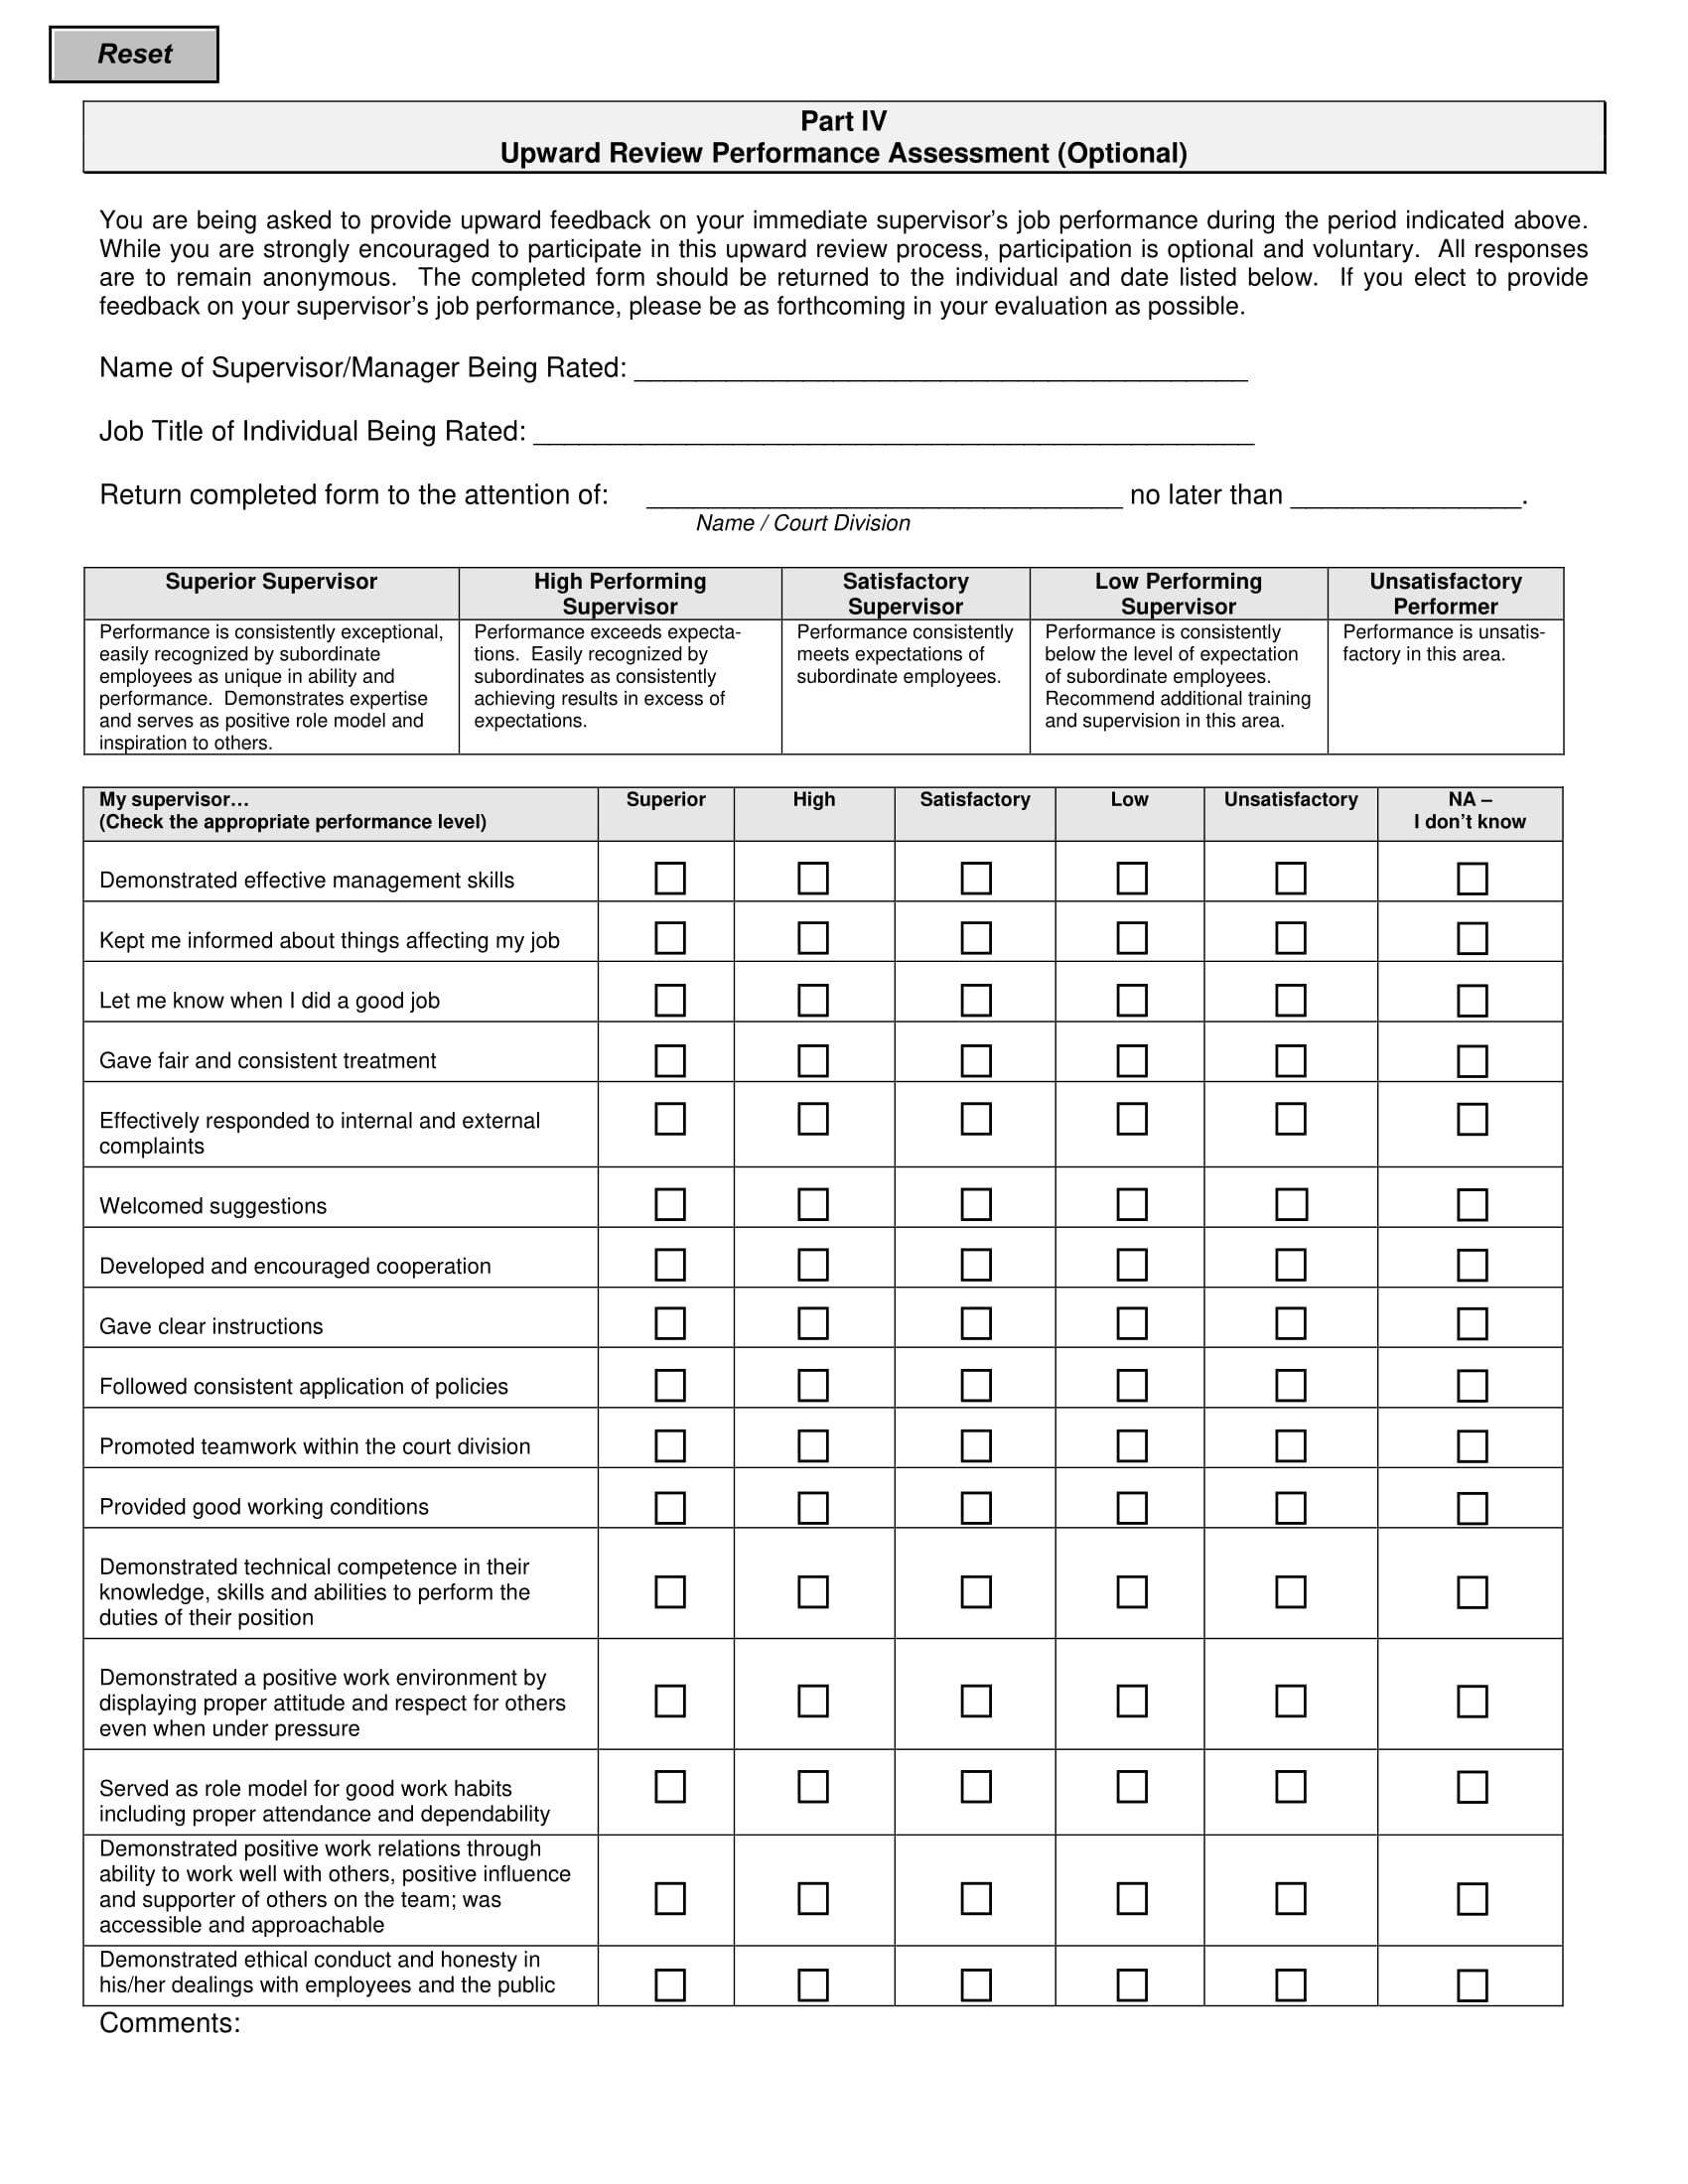 manager review performance assessment form 1